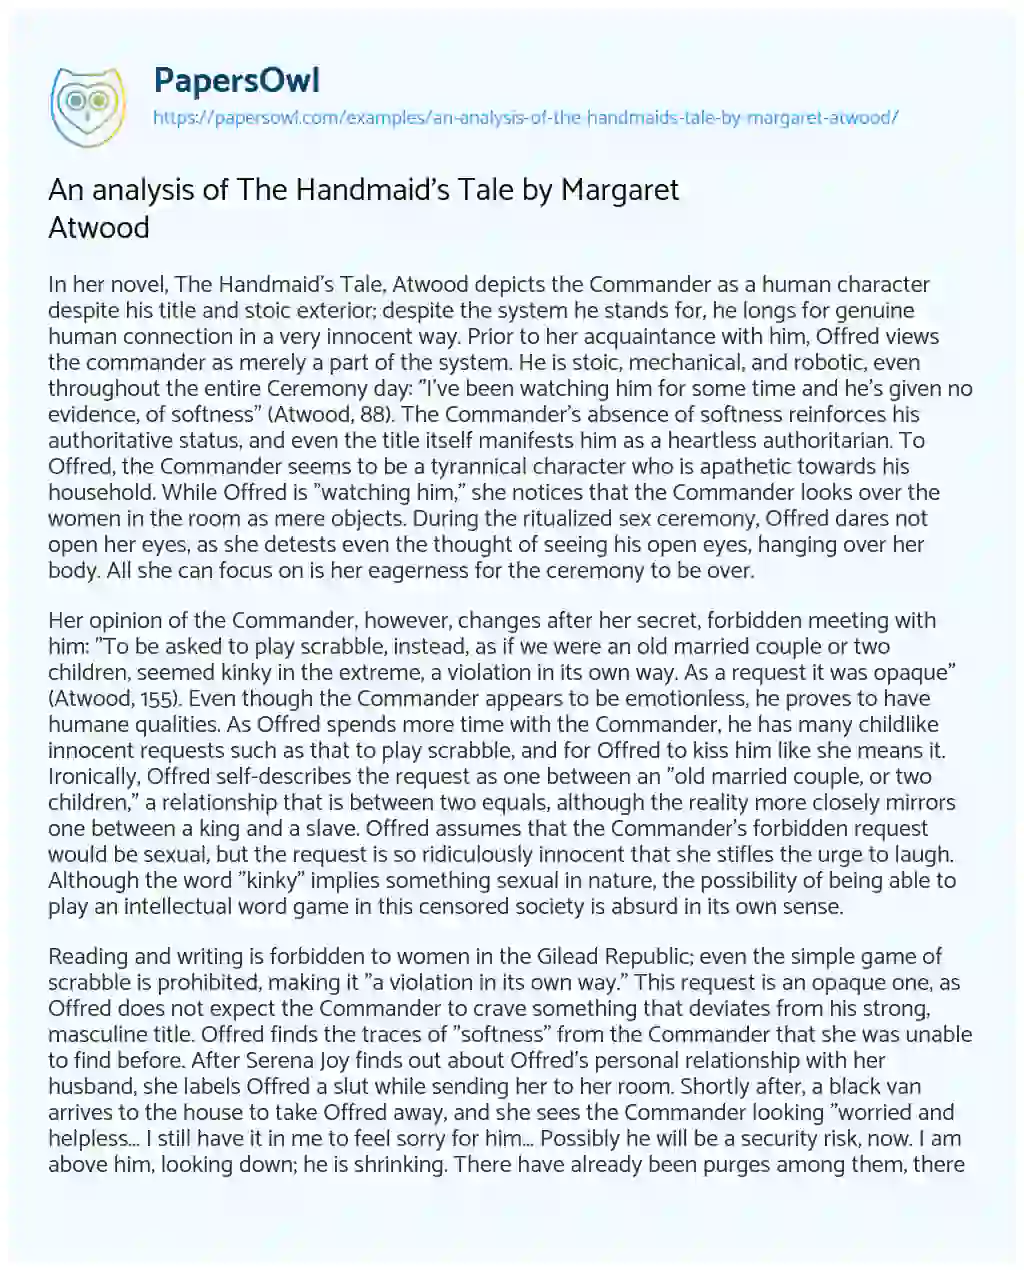 Essay on An Analysis of the Handmaid’s Tale by Margaret Atwood